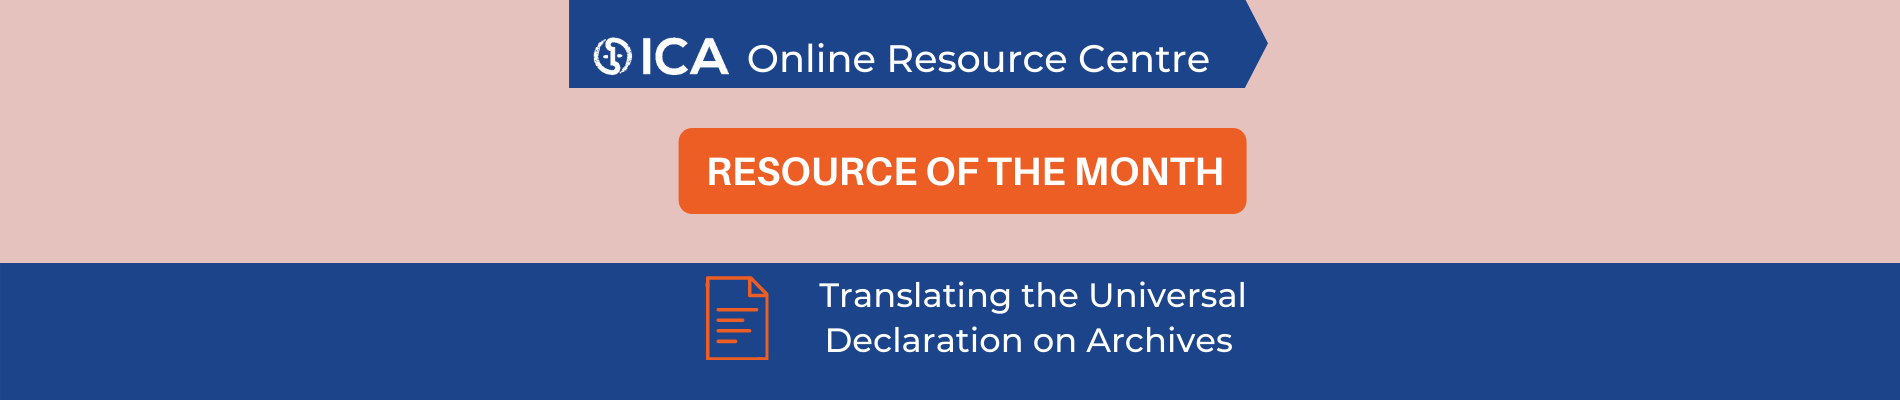 resource_of_the_month_banner_1900x400_eng_0